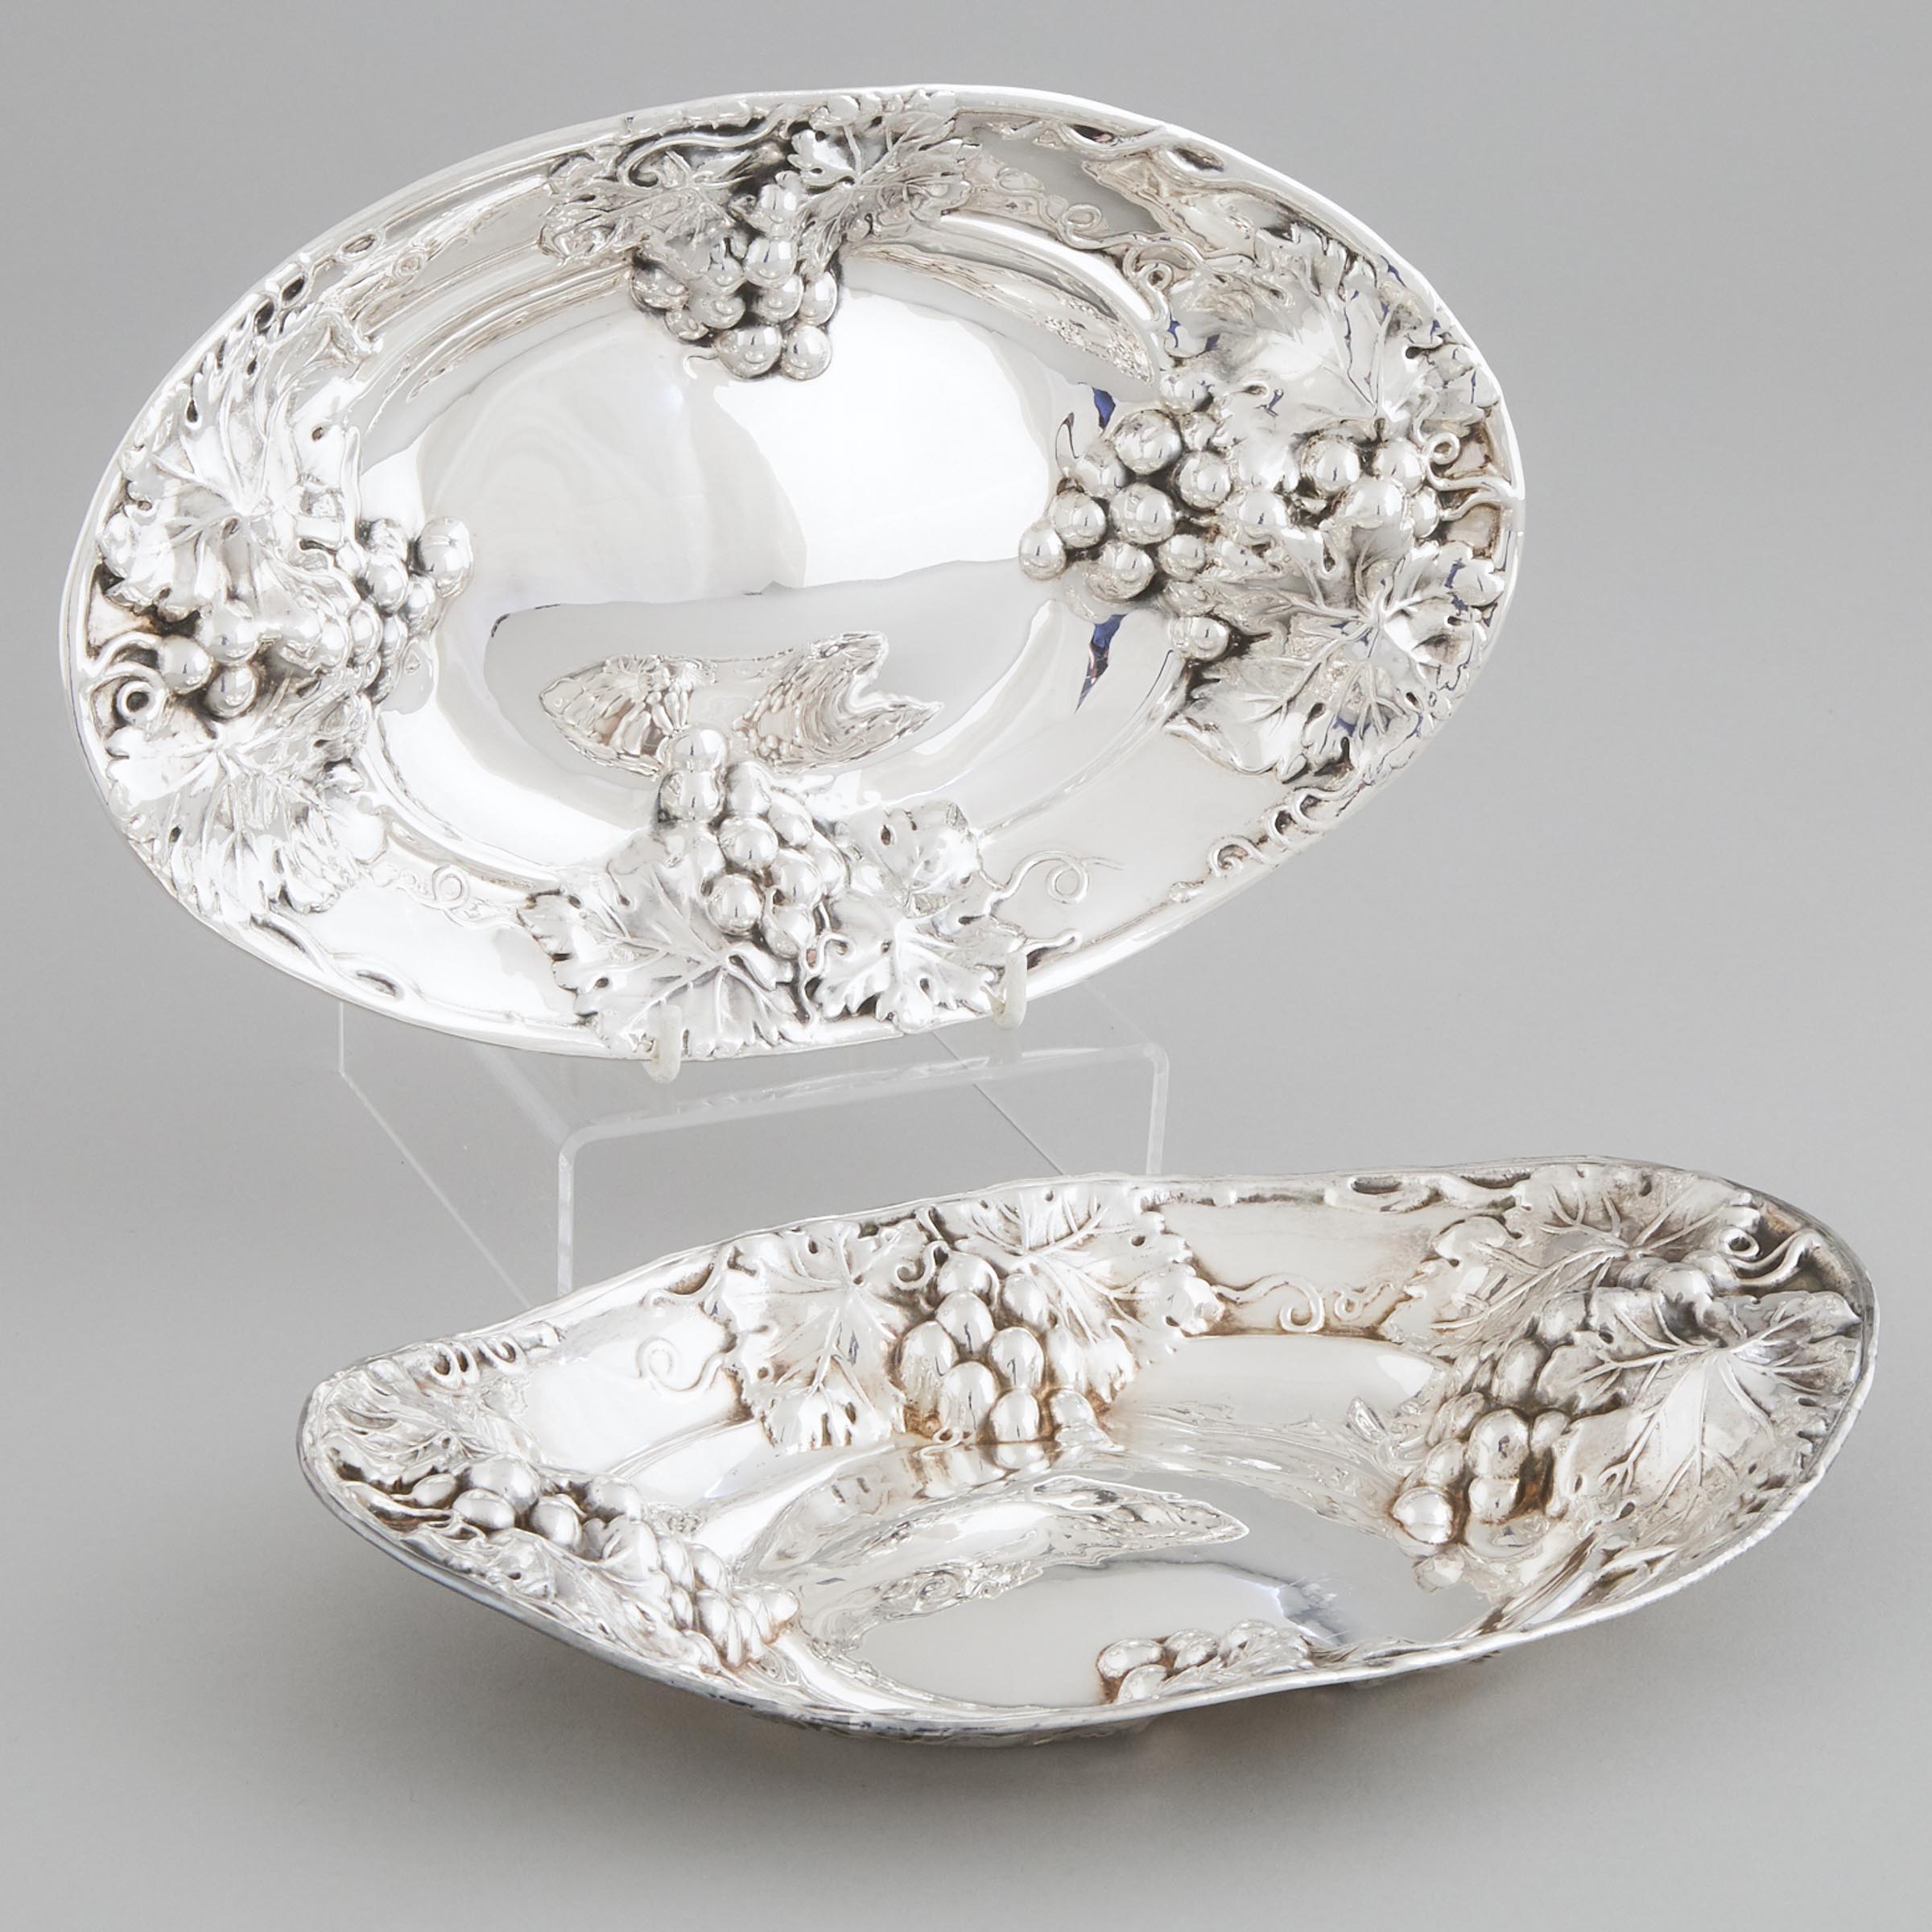 Pair of Canadian Silver Repoussé Oval Dishes, Henry Birks & Sons, Montreal, Que., early 20th century